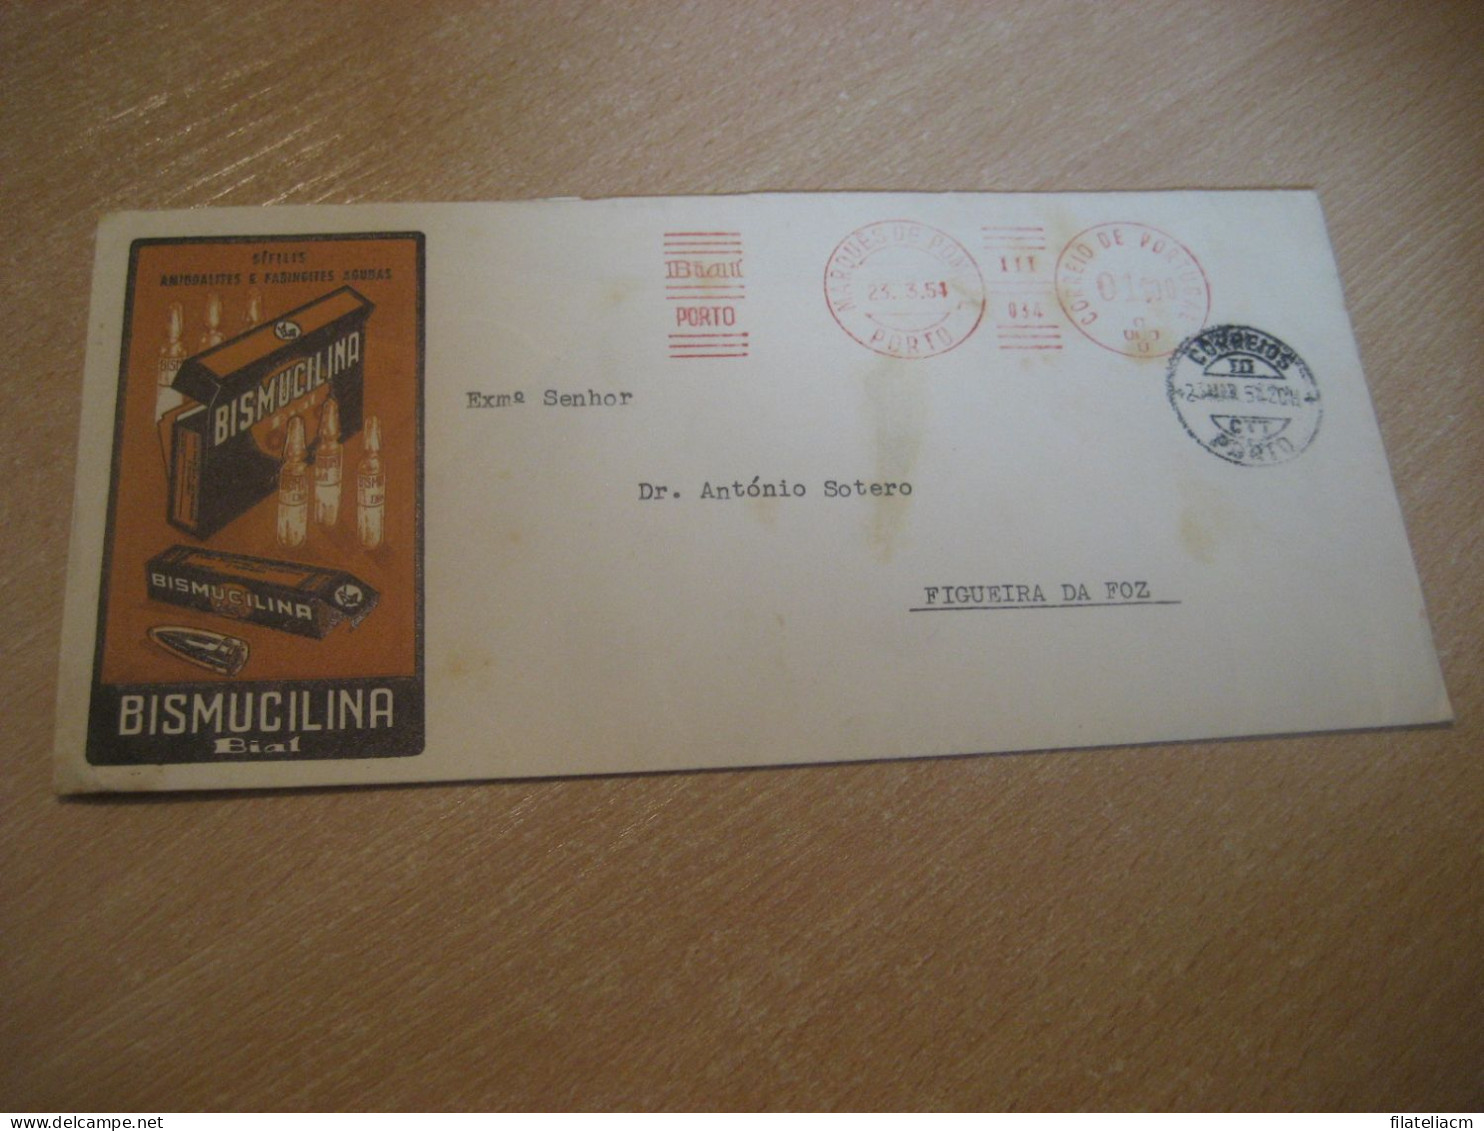 PORTO 1954 To Figueira Da Foz Bial Bismucilina Pharmacy Health Chemical Meter Mail Cancel Cover PORTUGAL - Brieven En Documenten